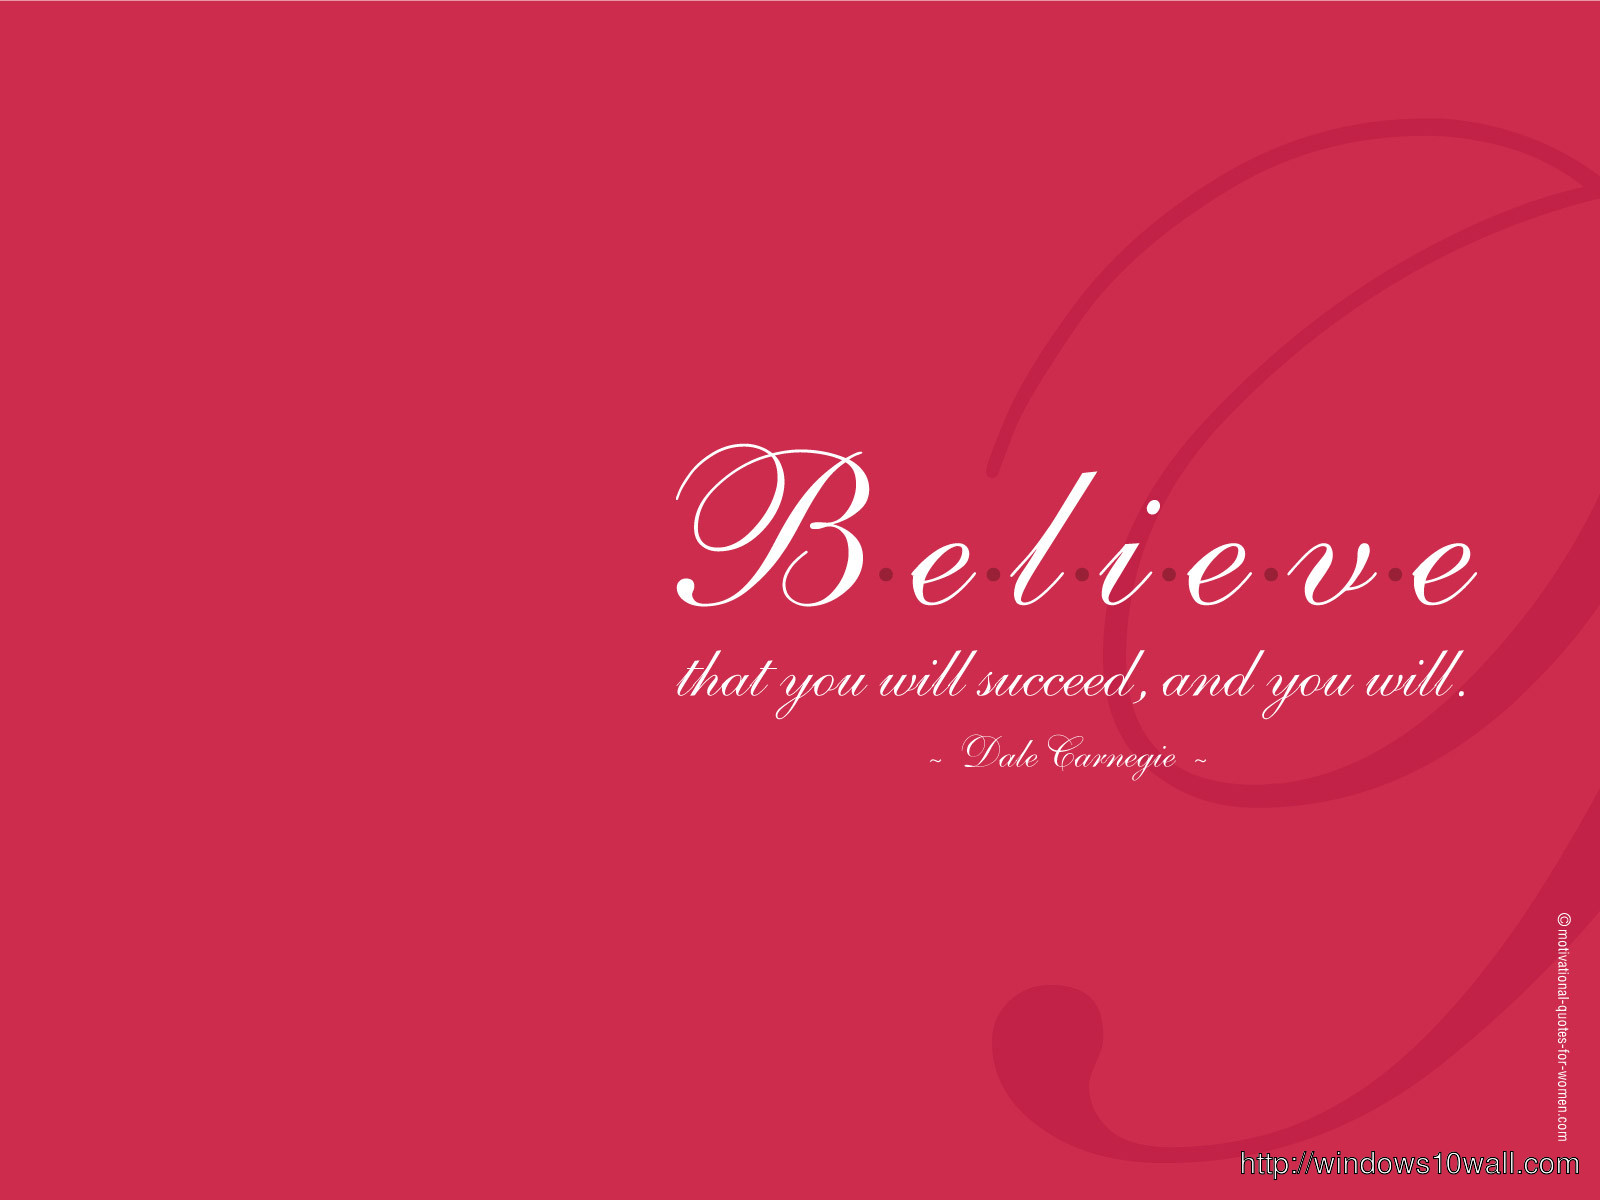 Download Believe Quotes hd Wallpaper free